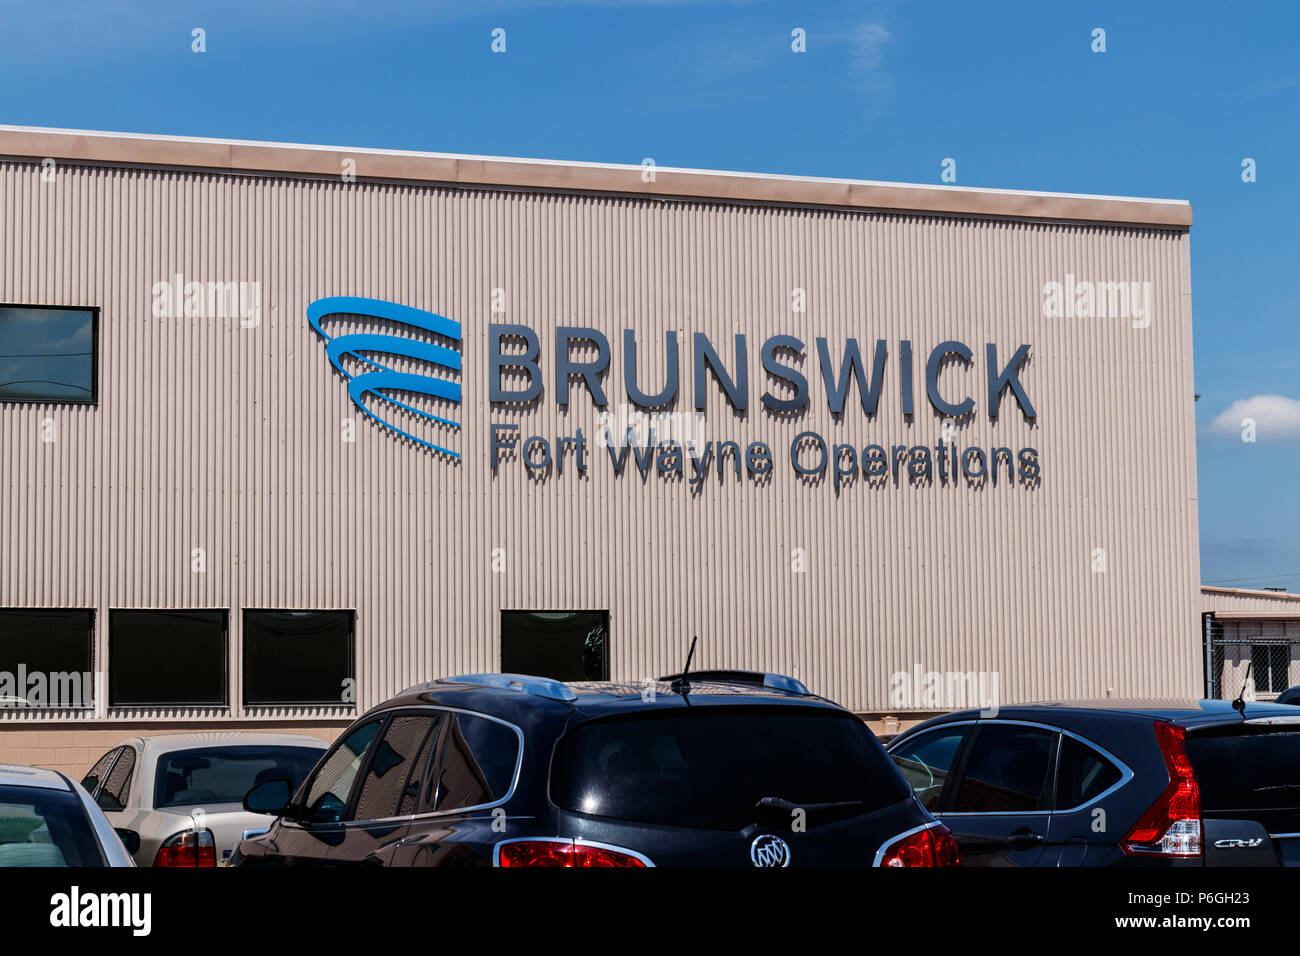 Ft. Wayne - Circa June 2018: Brunswick Fort Wayne Operations. Brunswick is a leader in the marine, fitness and billiards industries I Stock Photo